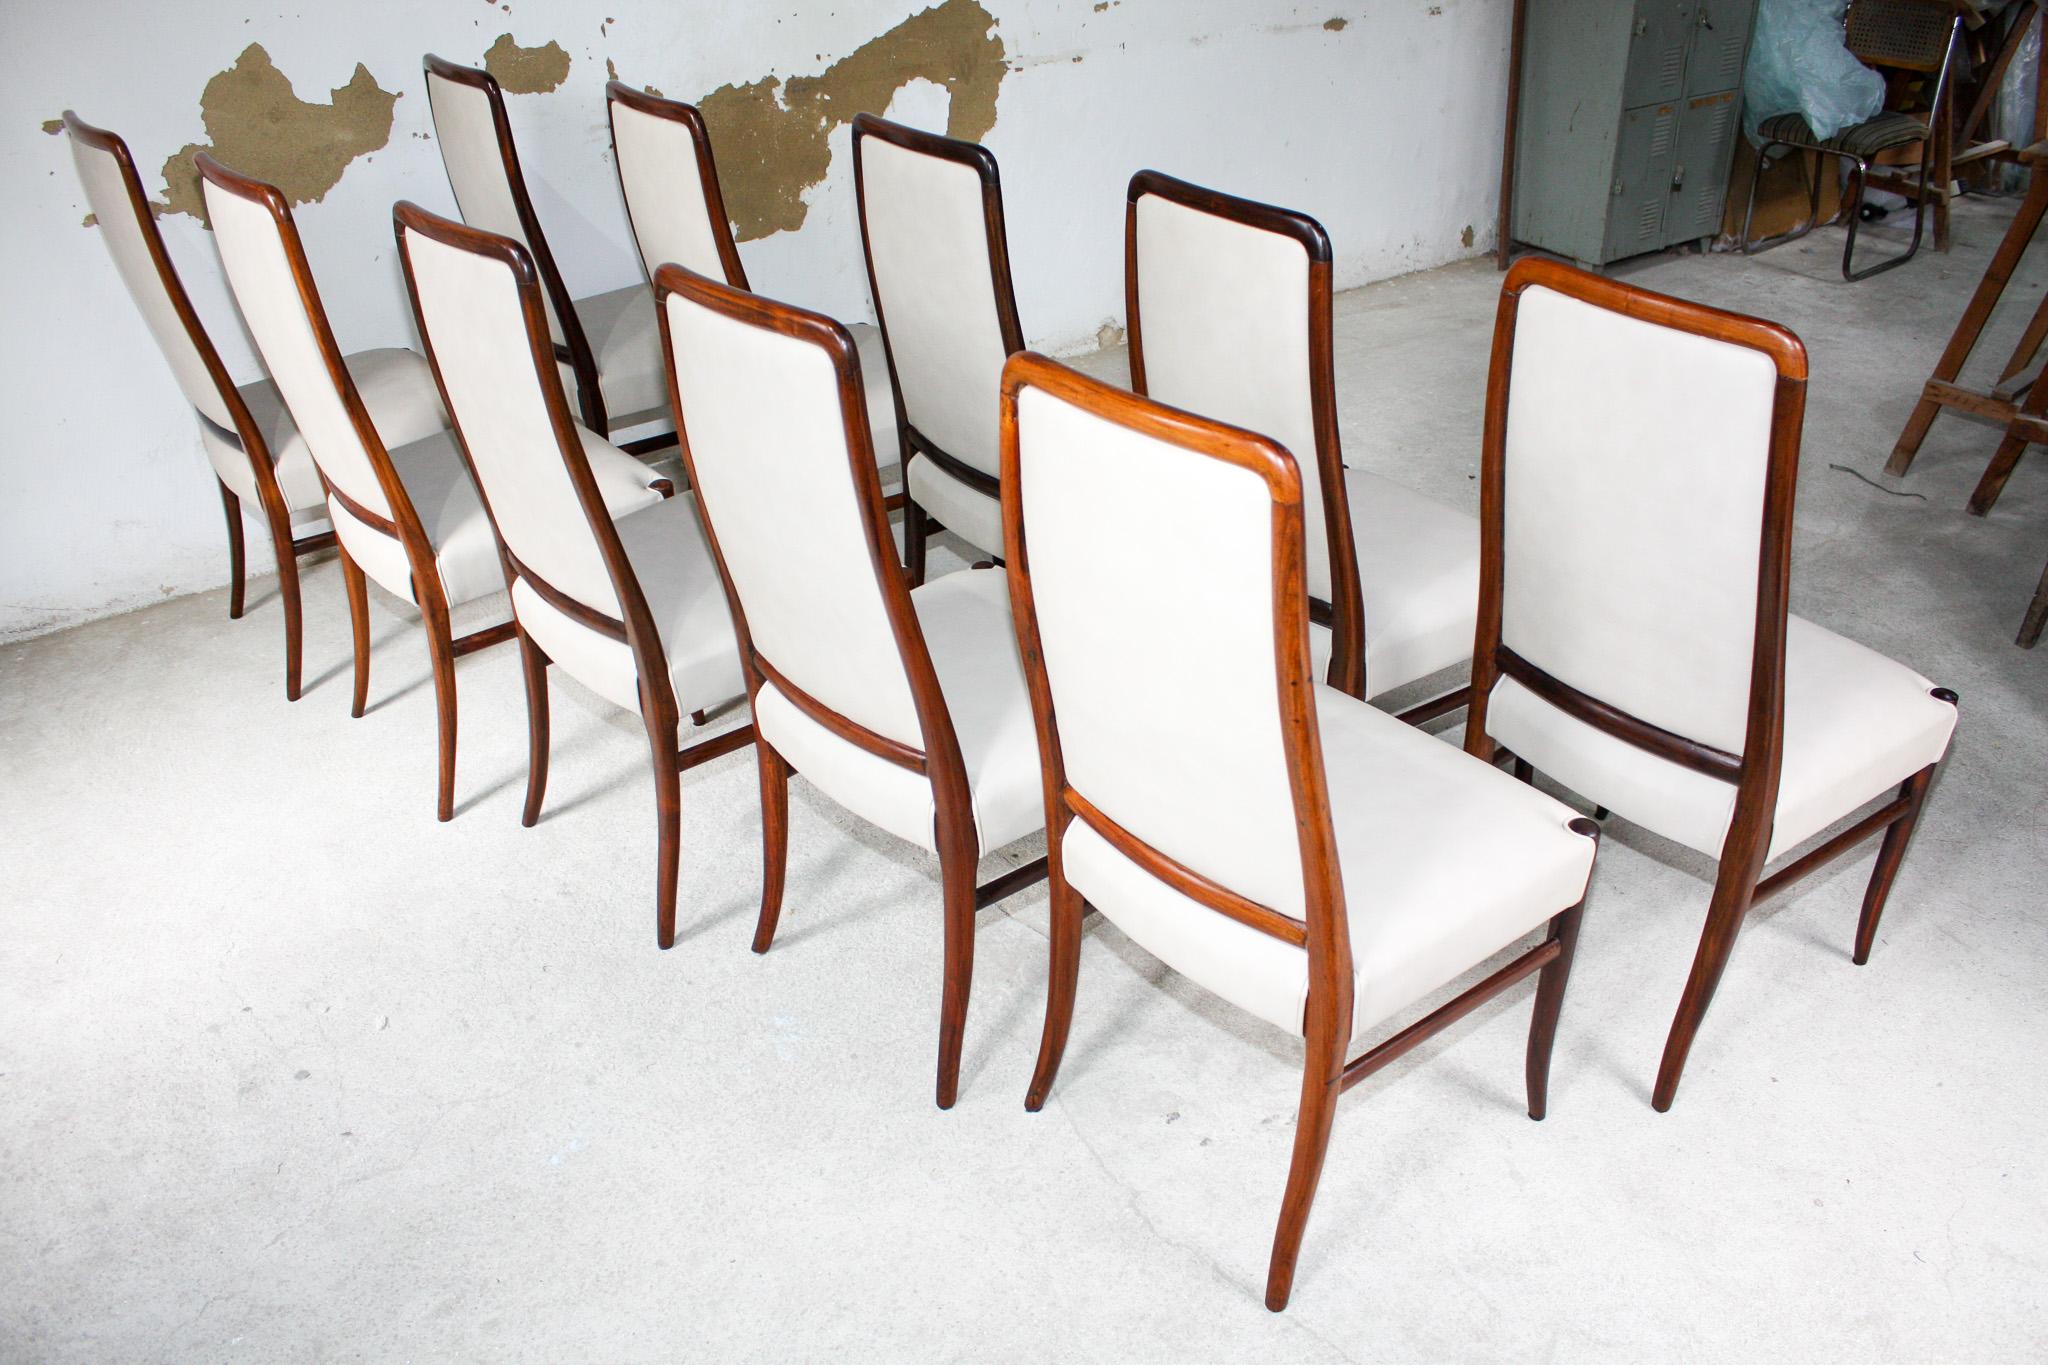 Brazilian Modern 10 Chair Set in Hardwood & Beige Leather Joaquim Tenreiro 1960s In Good Condition For Sale In New York, NY